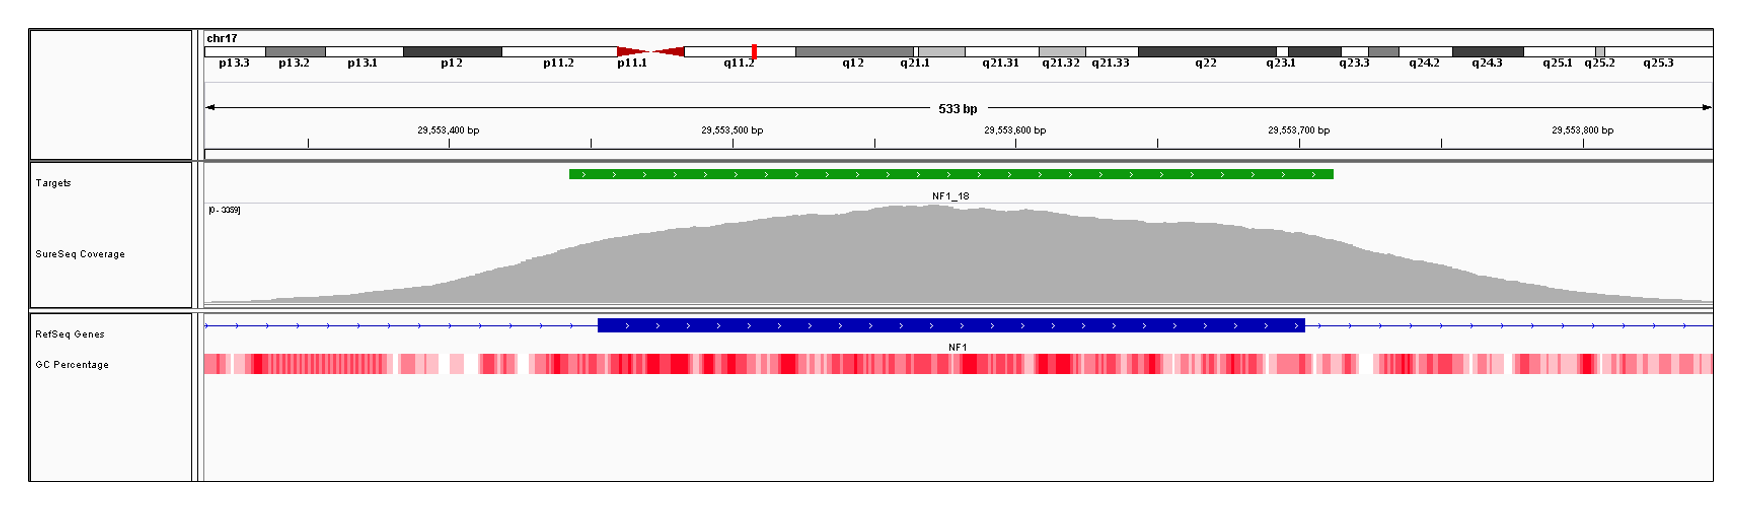 NF1 Exon 18 (hg19 chr17:29553453-29553702). Depth of coverage per base (grey). Targeted region (green). Gene coding region as defined by RefSeq (blue). GC percentage (red). Image